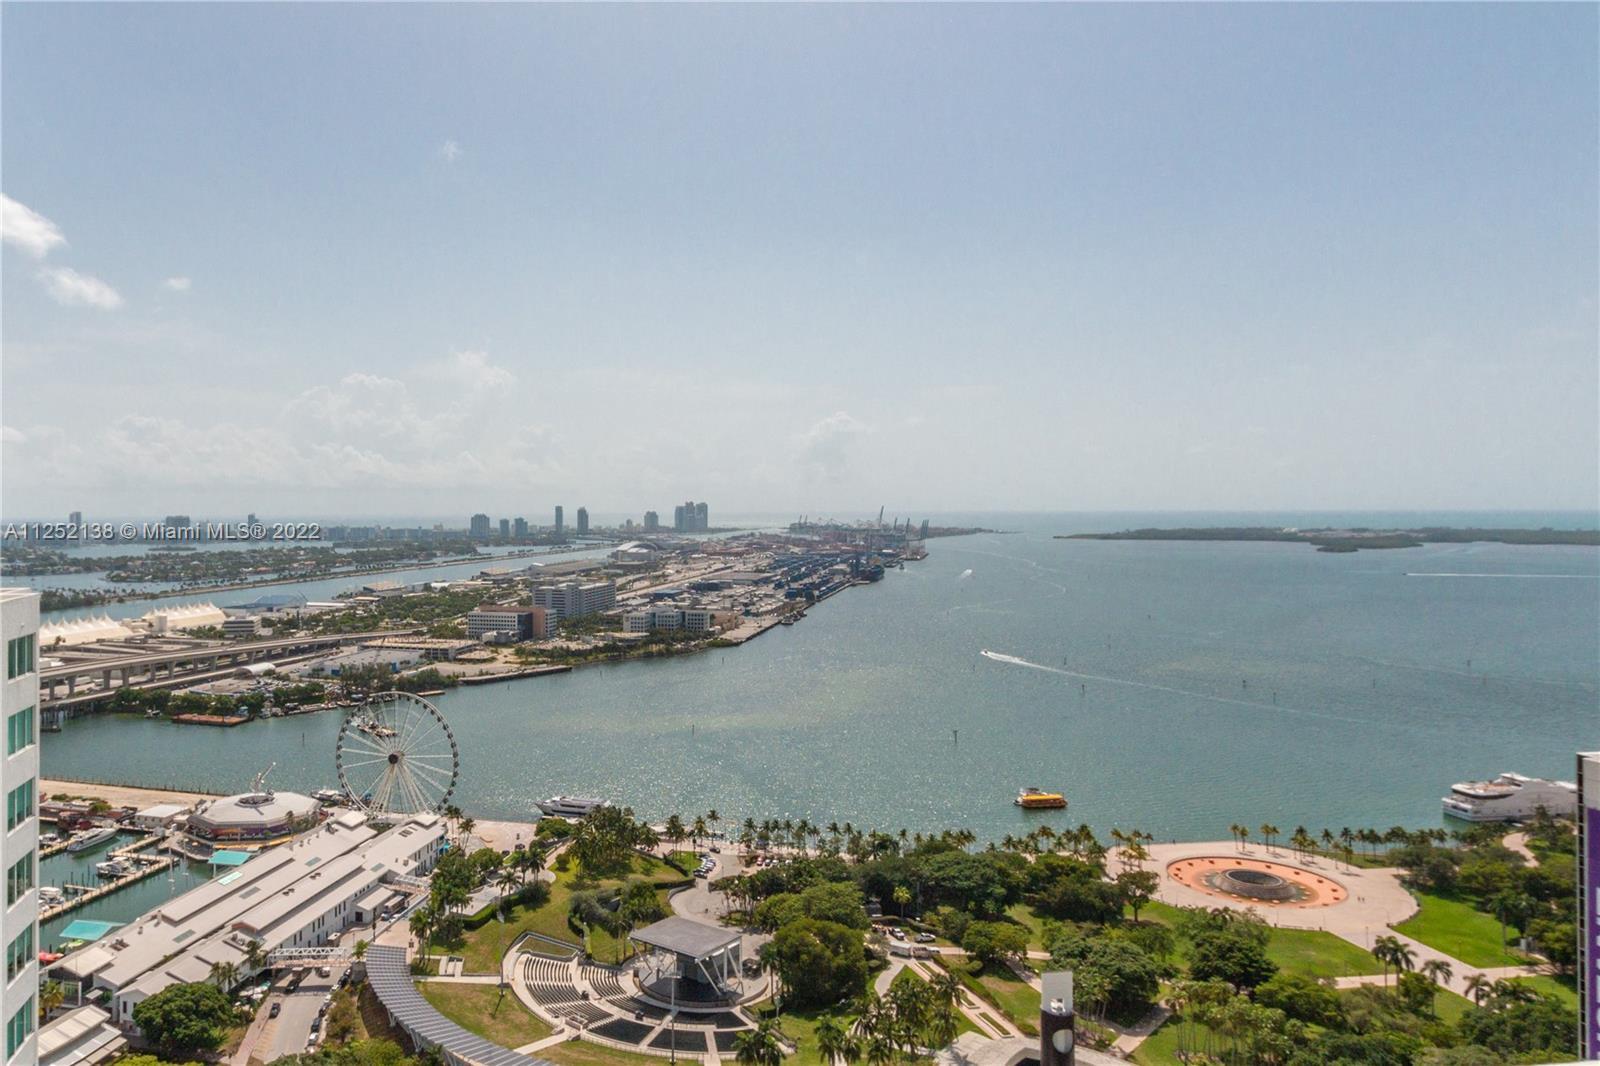 Located at the heart of Downtown Miami, these 3 bedrooms, 3 full baths unit boasts an amazing 180-de